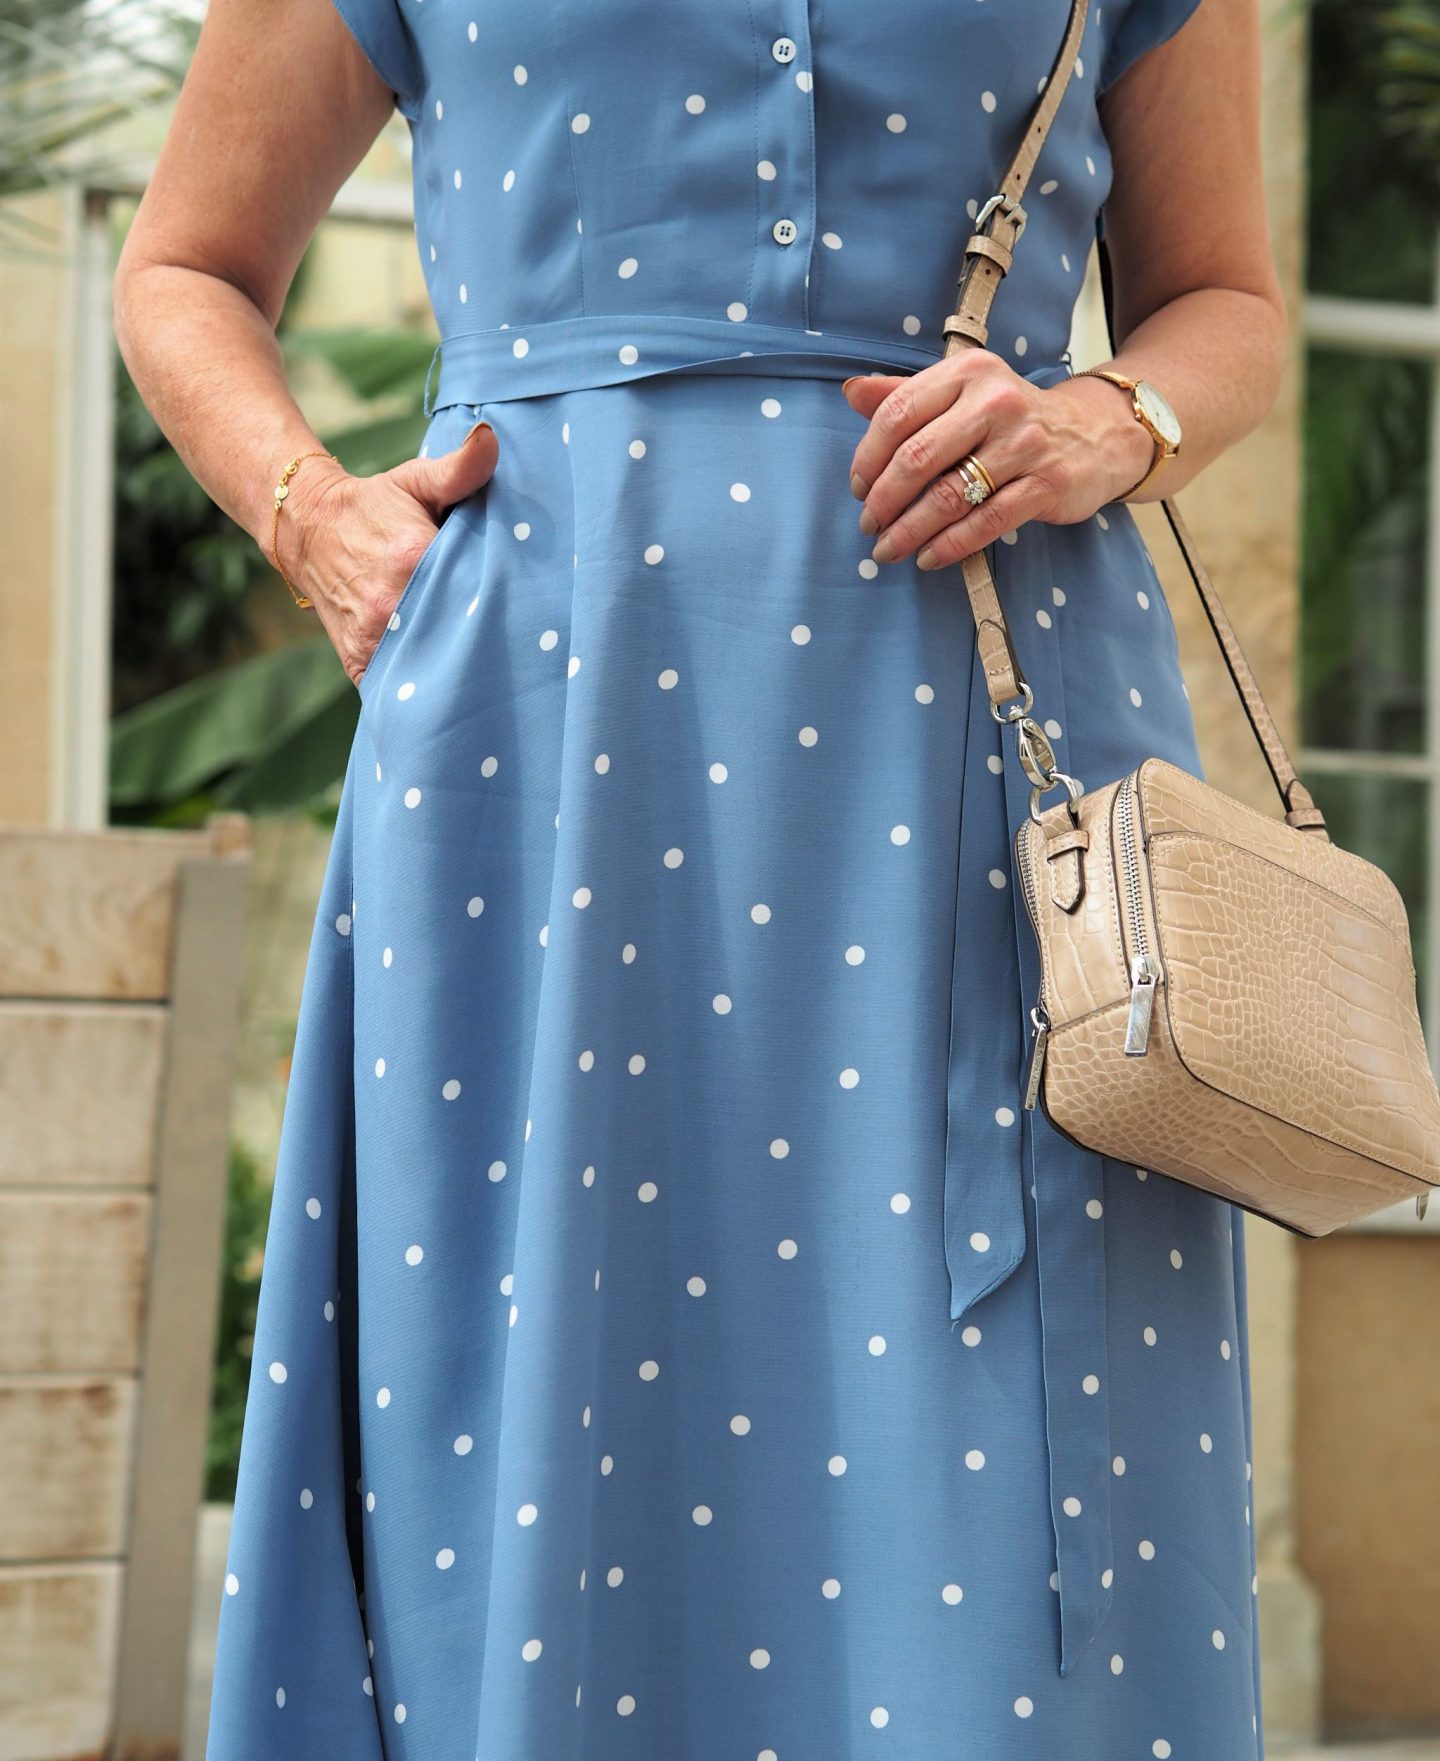 I wanted to catch a sunny couple of hours so that I could share this spotty dress with you. Not only did I manage to get ready super quick, but I also shot all of these photos myself. Something I don't normally do.